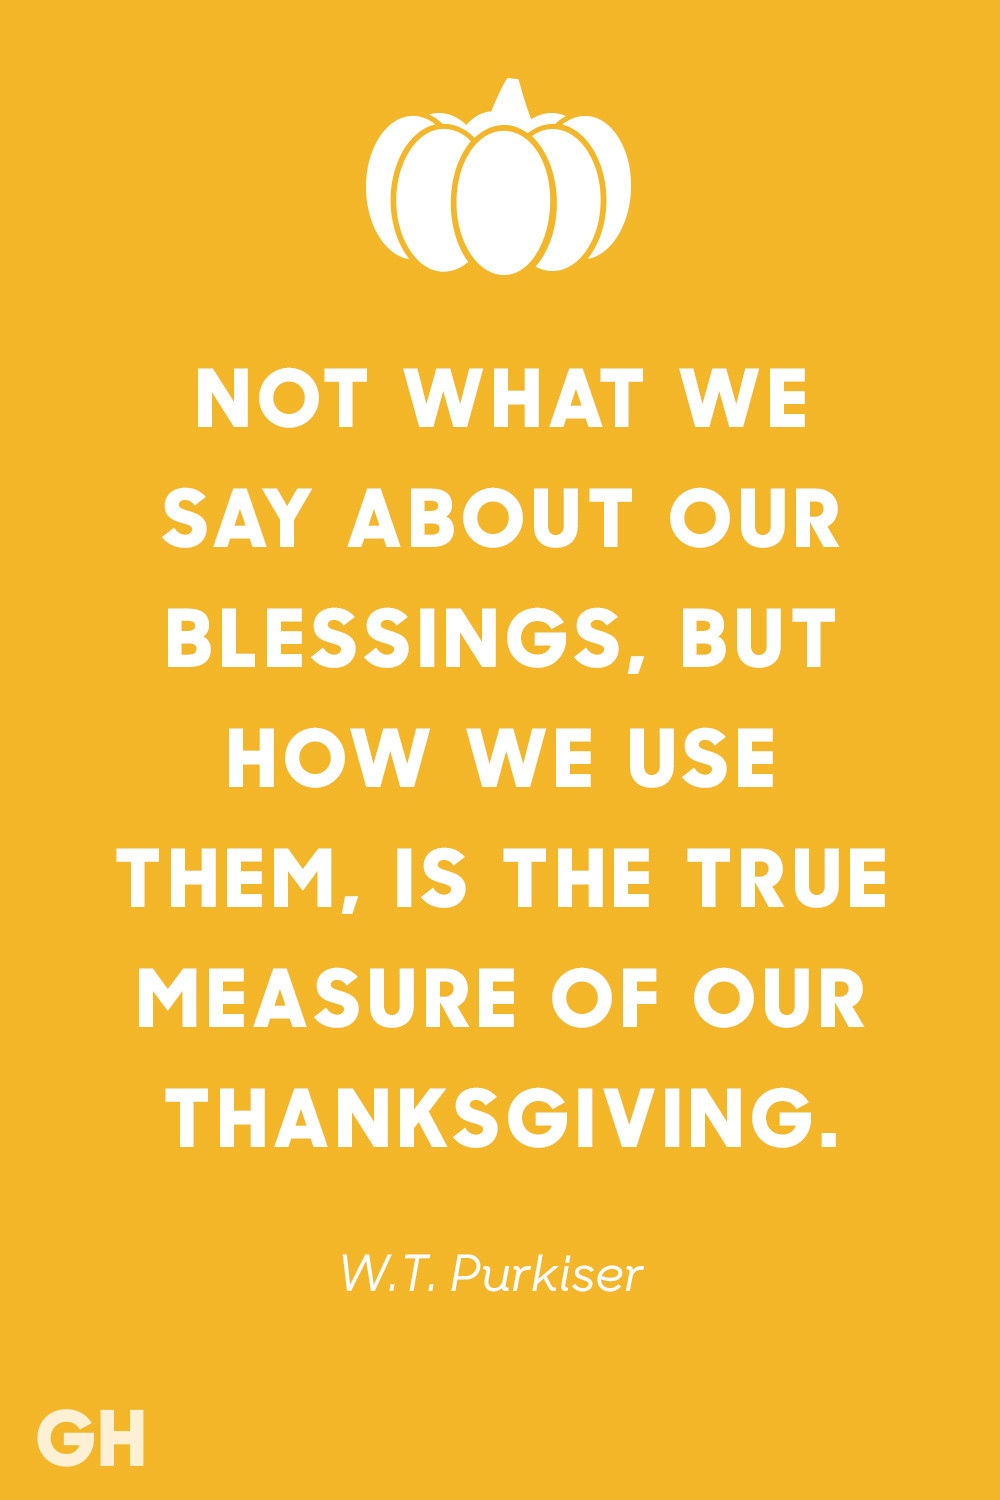 Quote On Thanksgiving
 15 Best Thanksgiving Quotes Inspirational and Funny